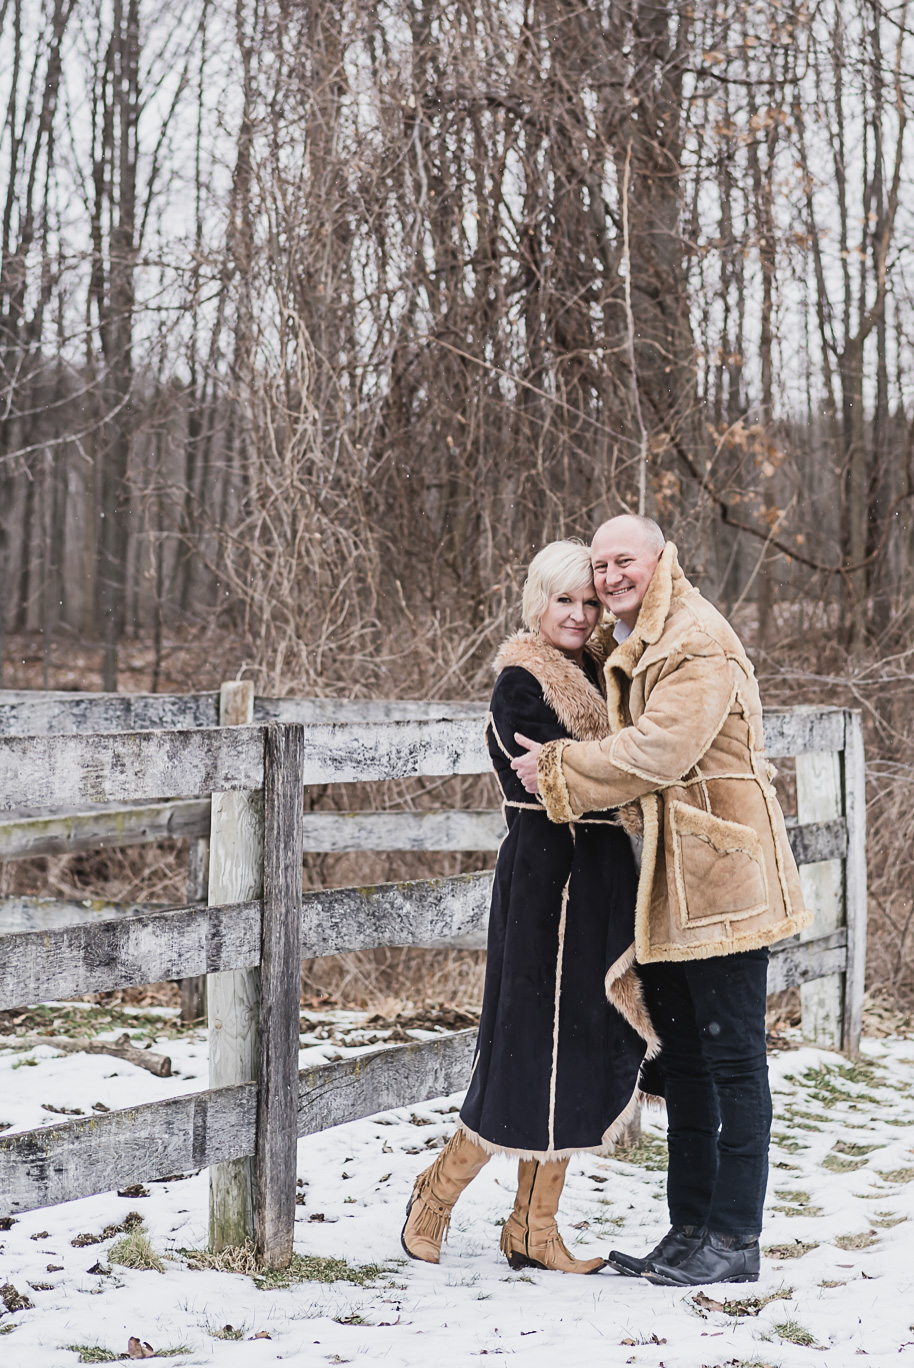 Snowy winter engagement photos in Romeo, Michigan provided by Kari Dawson, top-rated Southeastern Michigan wedding and engagement photographer.